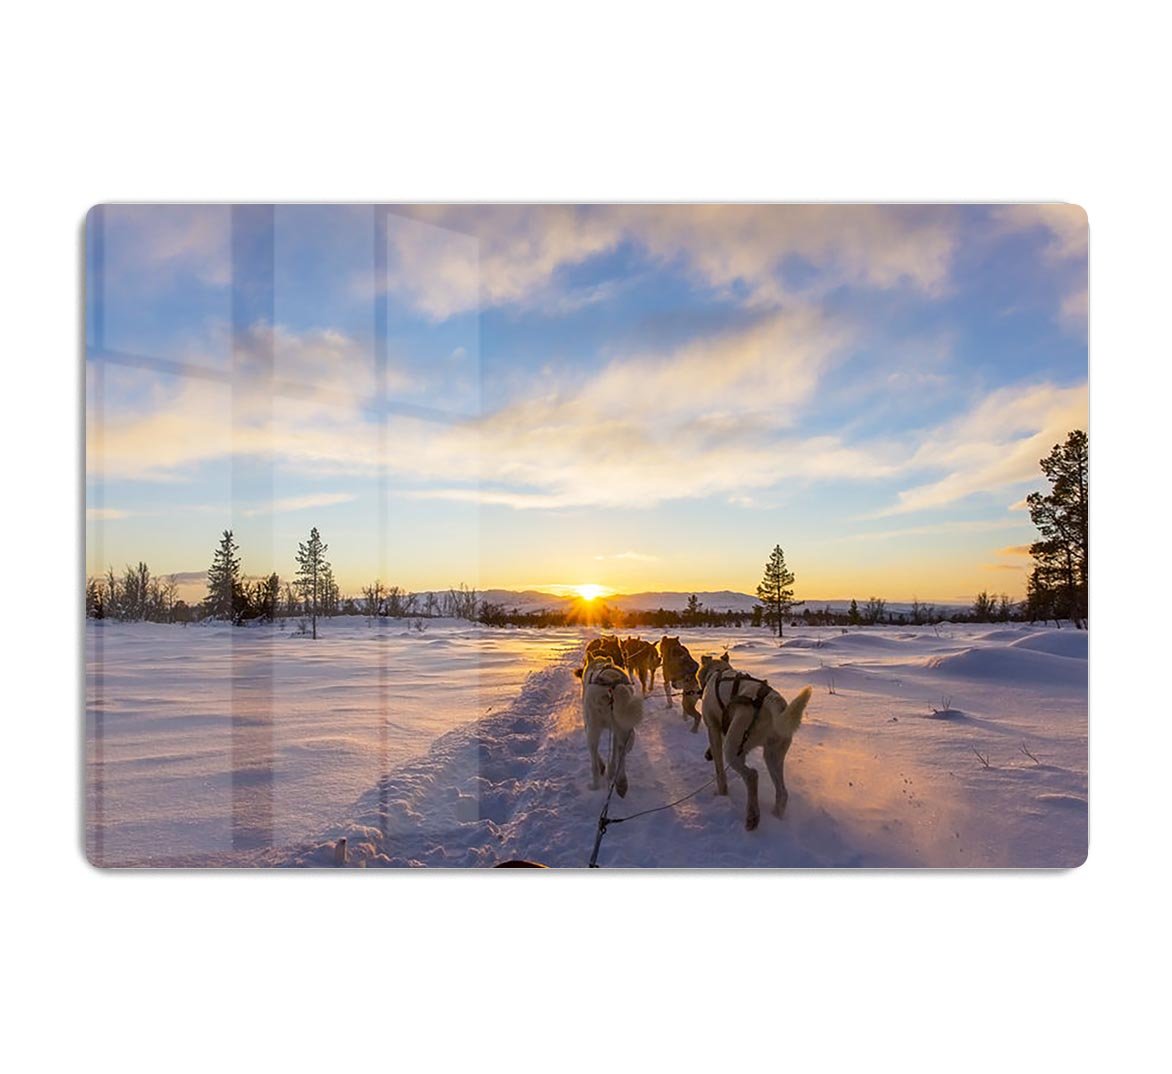 Musher and passenger in a dog sleigh with huskies a cold winter evening HD Metal Print - Canvas Art Rocks - 1